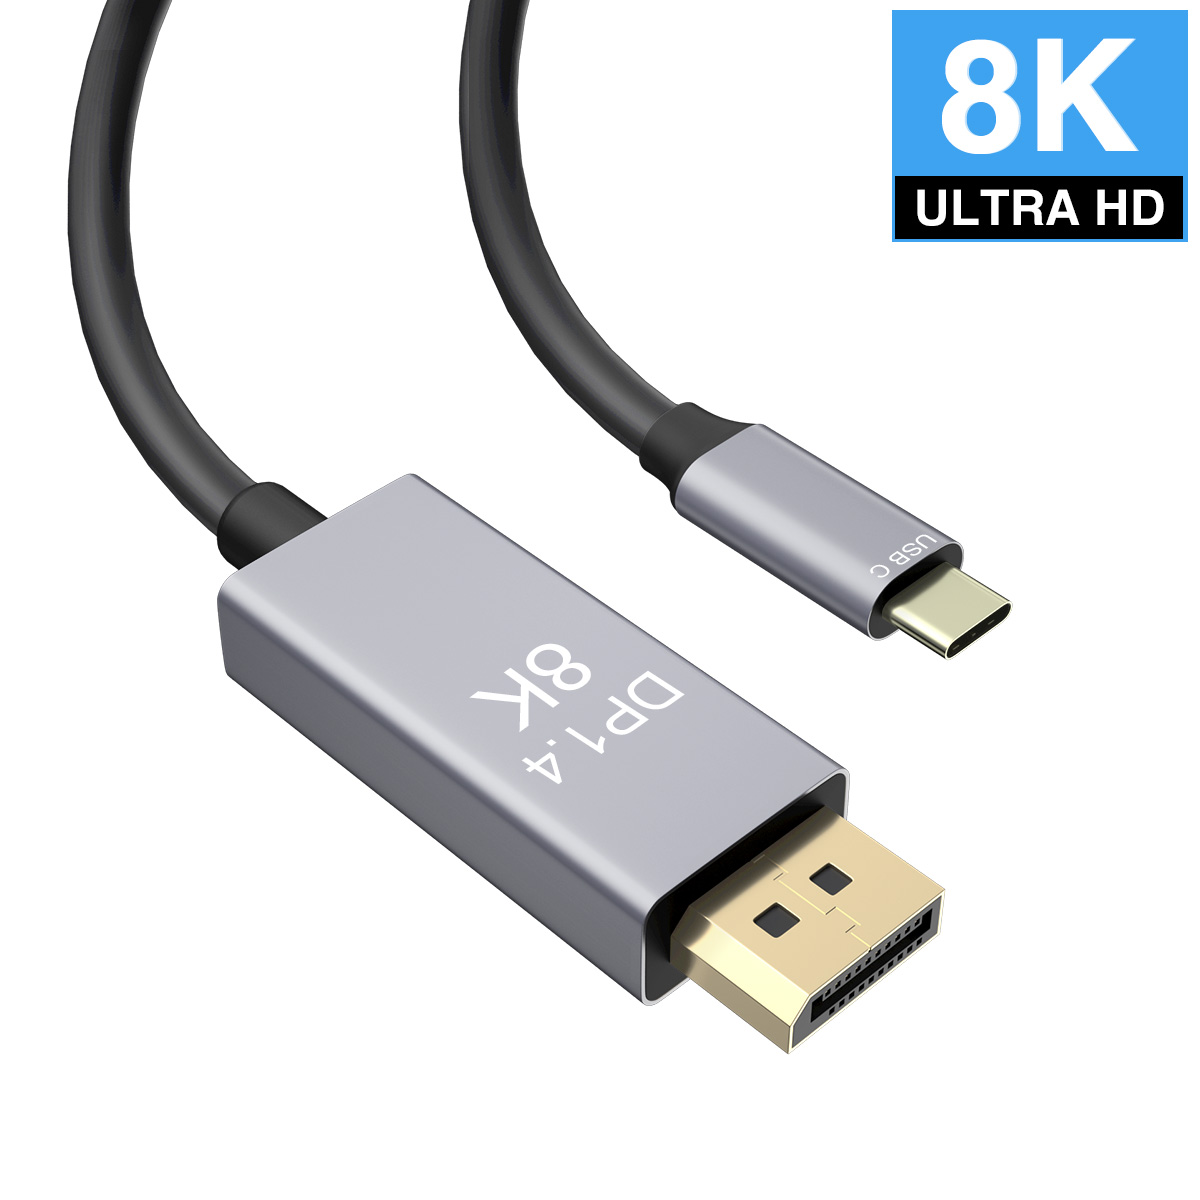 CABLEDECONN USB C to DisplayPort 1.4 8K 2M Cable with USB-C PD 8K@60Hz 4K@144Hz Converter Thunderbolt 3 to DisplayPort Adapter Compatible with New MacBook Pro T0404